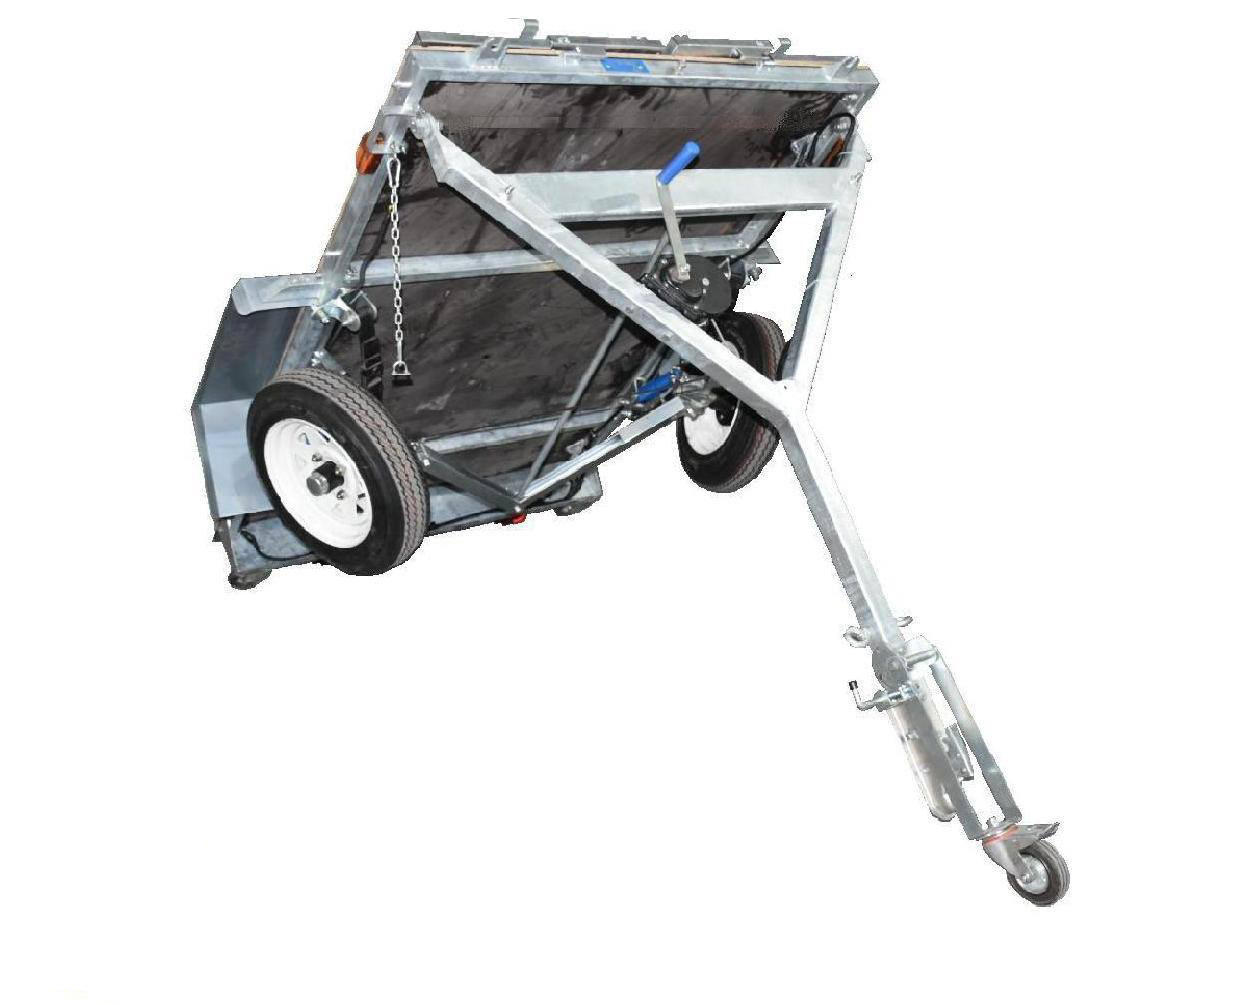 Snowaves Mechanical Wholesale folding trailers Supply for one-way trips